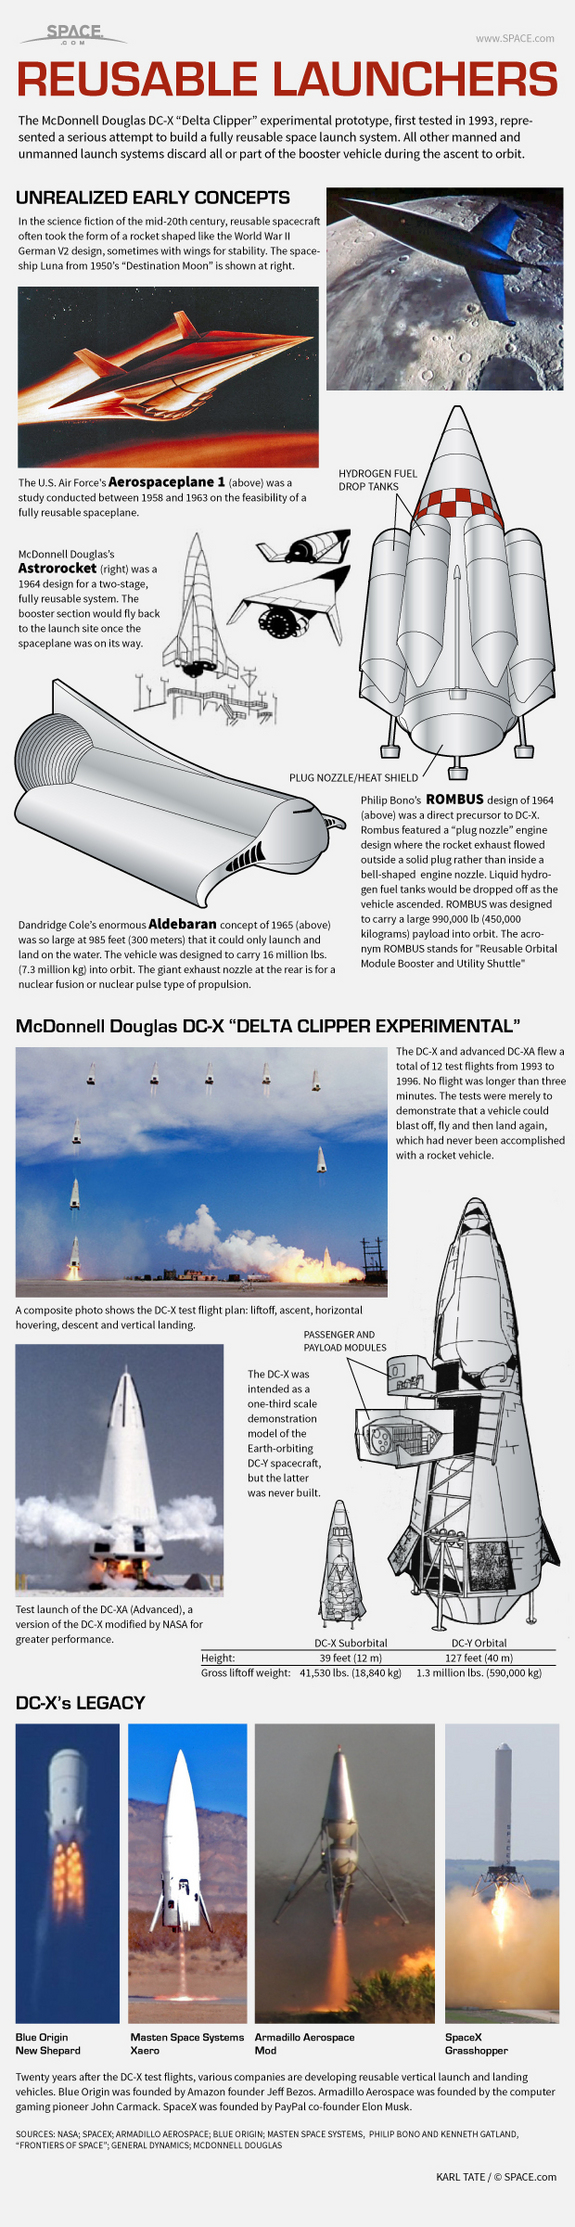 Find out about DC-X, a prototype reusable space launch system, in this SPACE.com infographic.